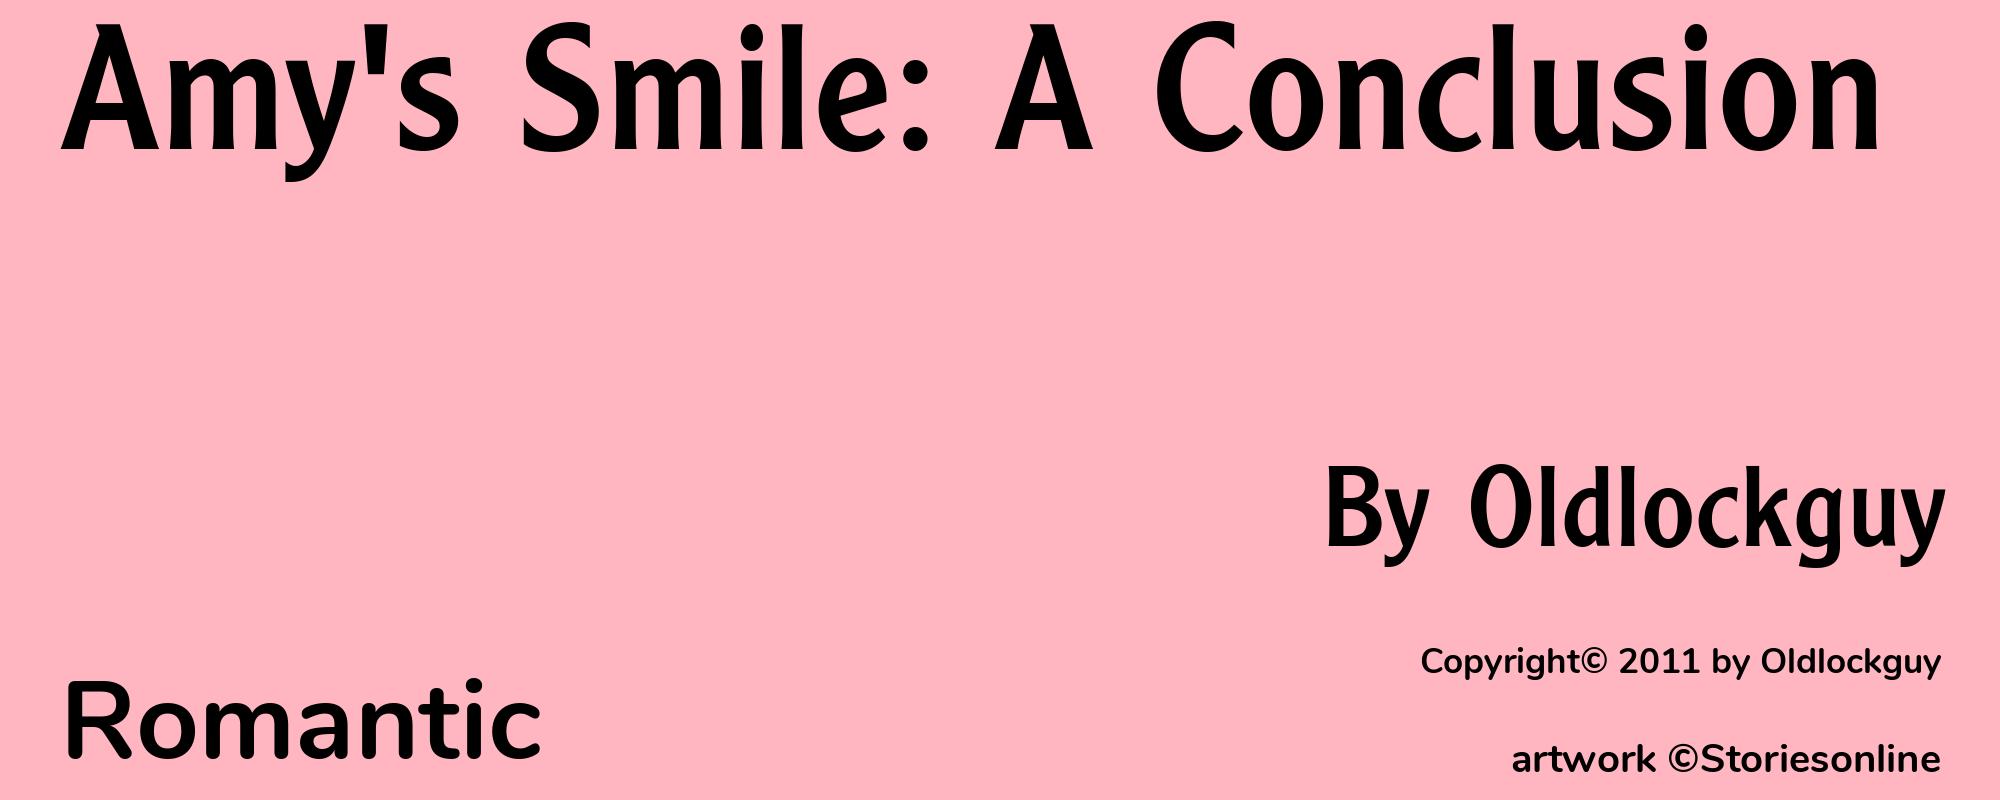 Amy's Smile: A Conclusion - Cover